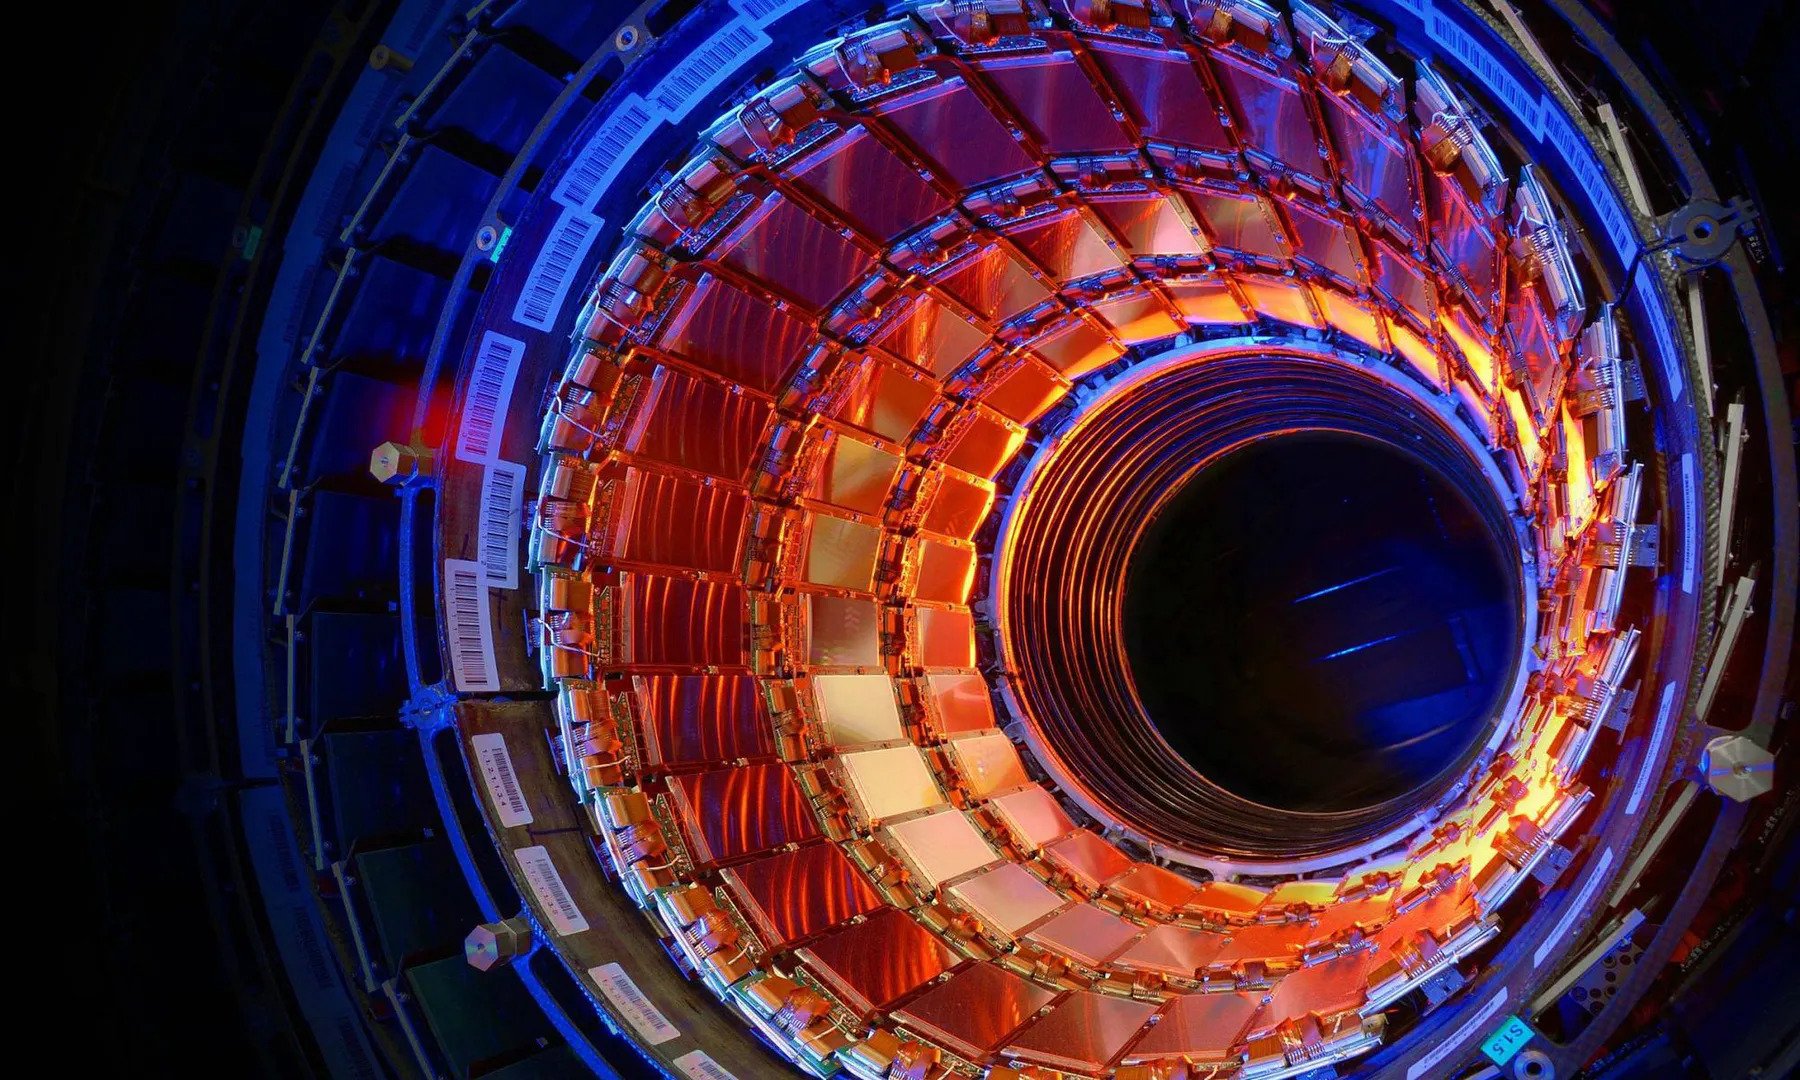 Four quarks at a time.  Surprising observations at the Large Hadron Collider